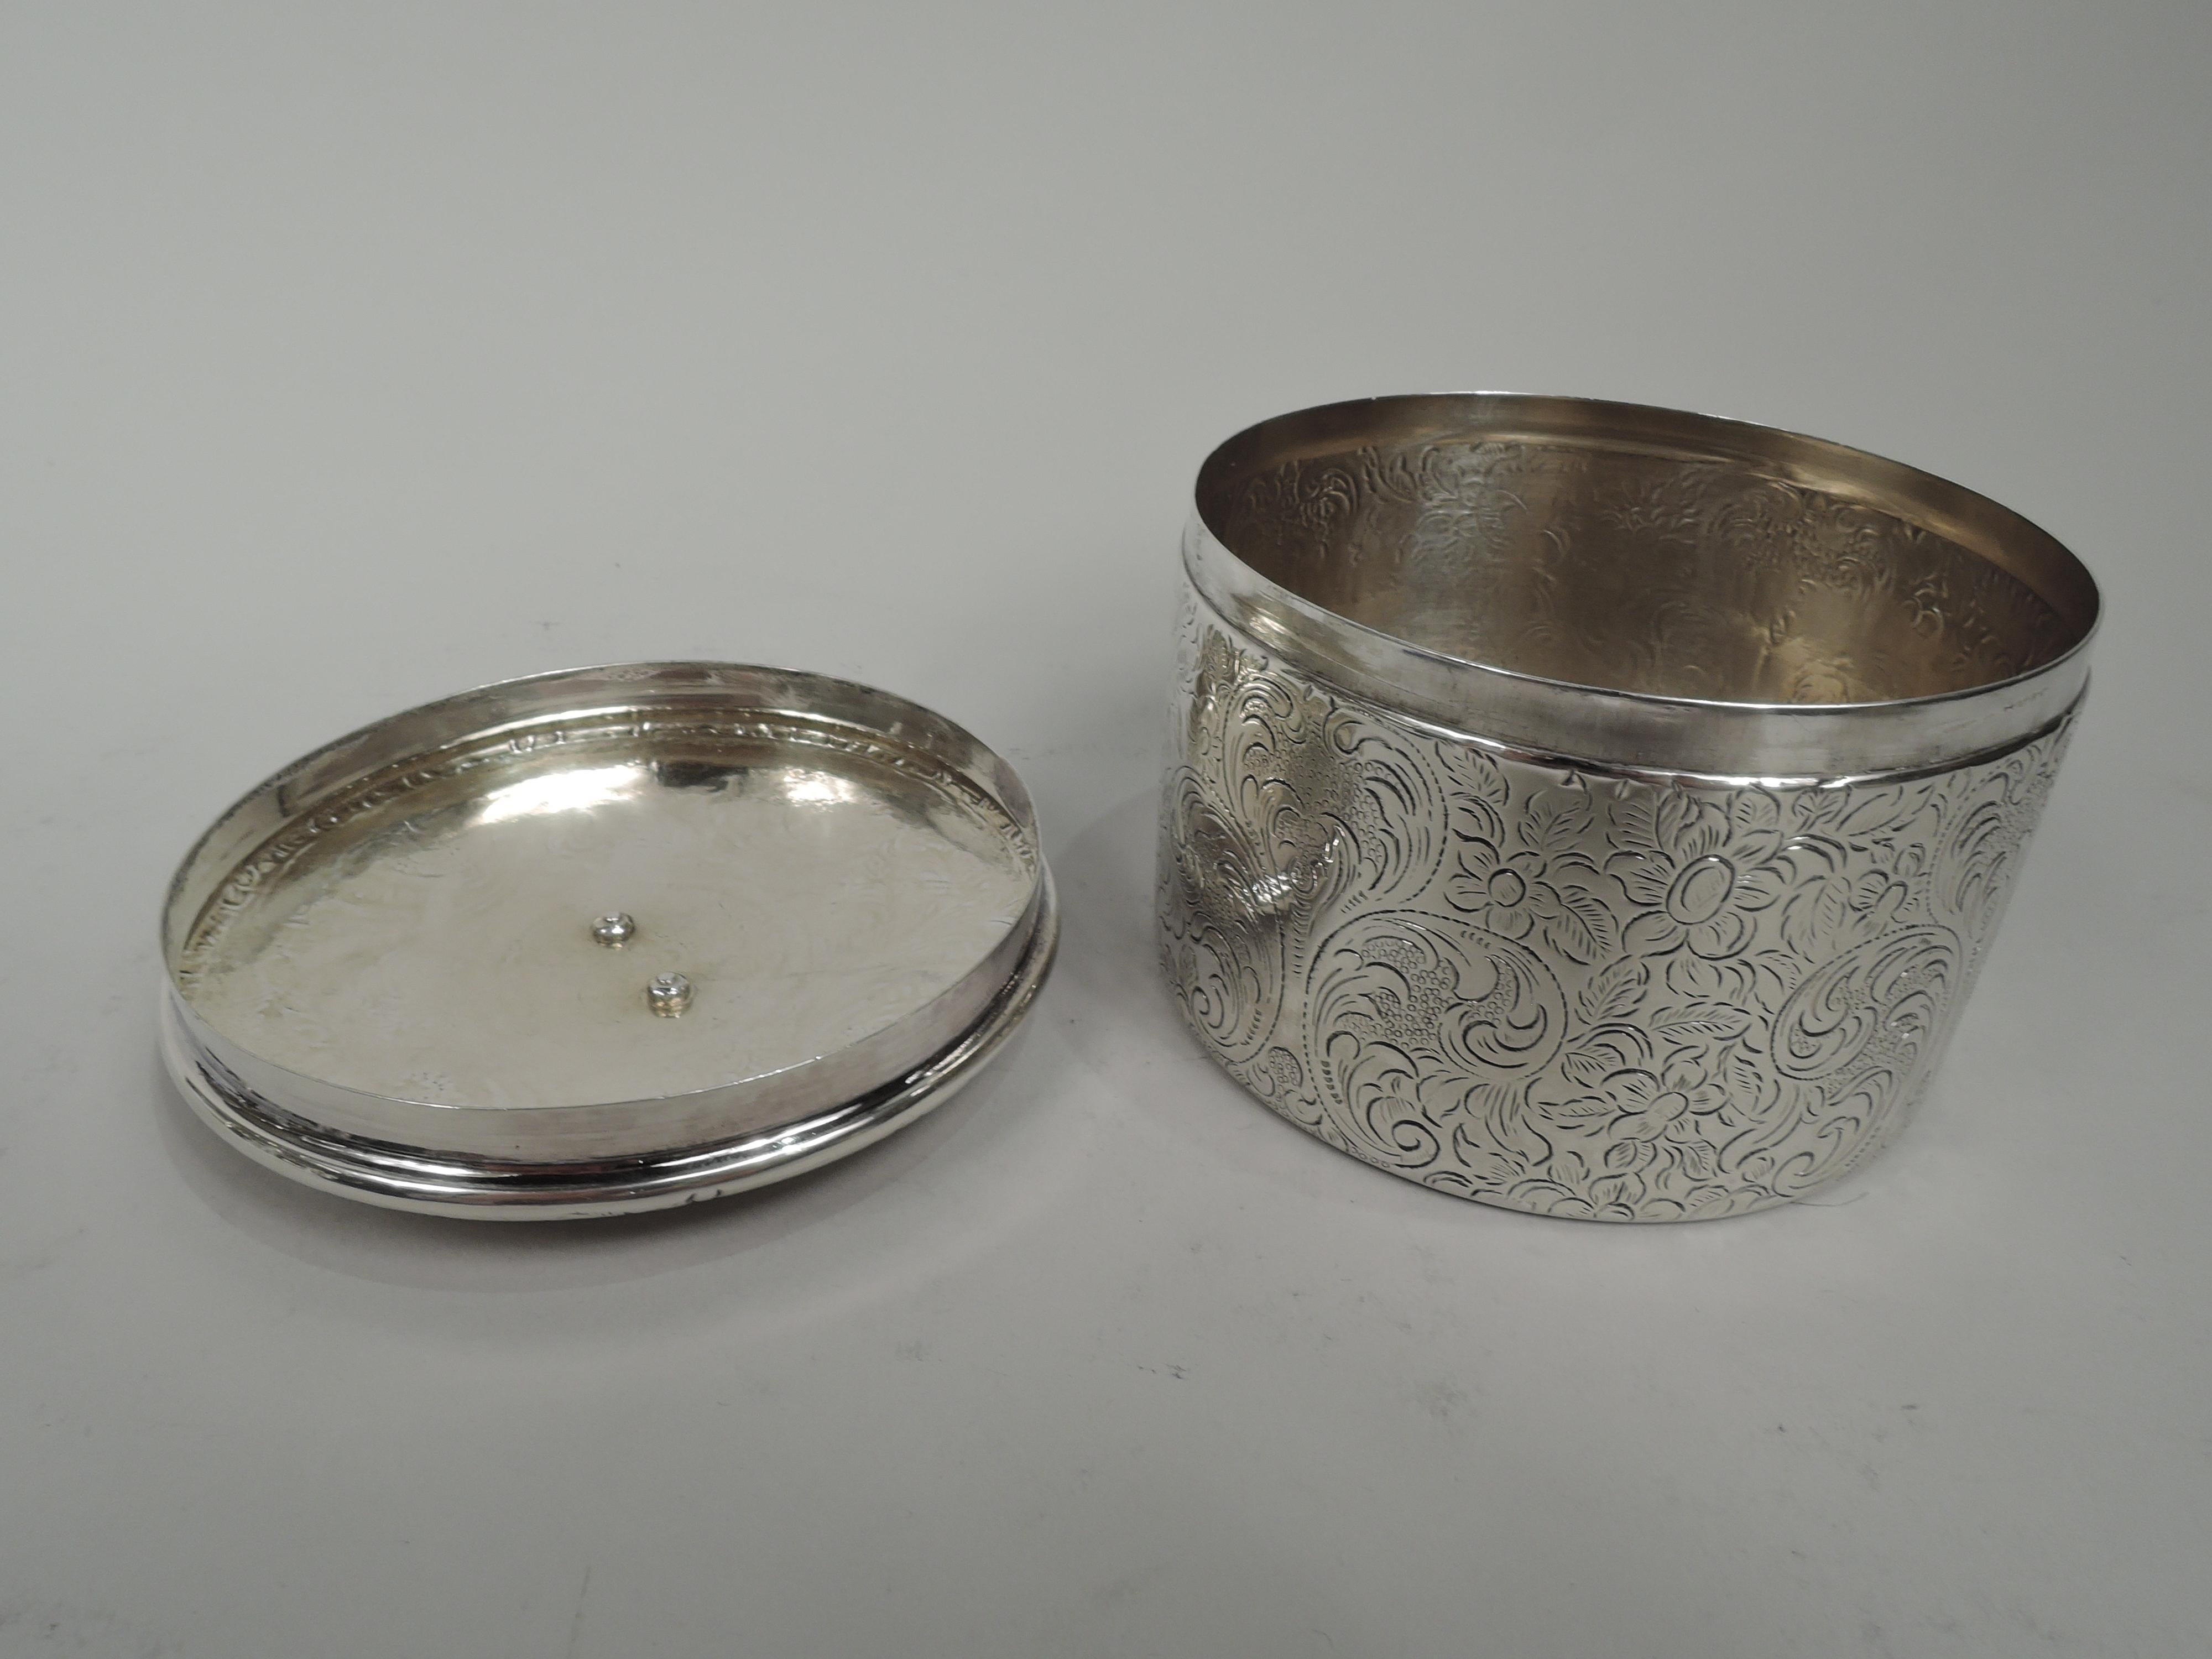 Austrian Biedermeier 812 silver box, 1835. Round with straight sides. Cover has plain sides and gently curved top. Engraved allover pattern with flowers and leafing scrollwork. On cover top is applied oval medallion applied with coronet and coat of